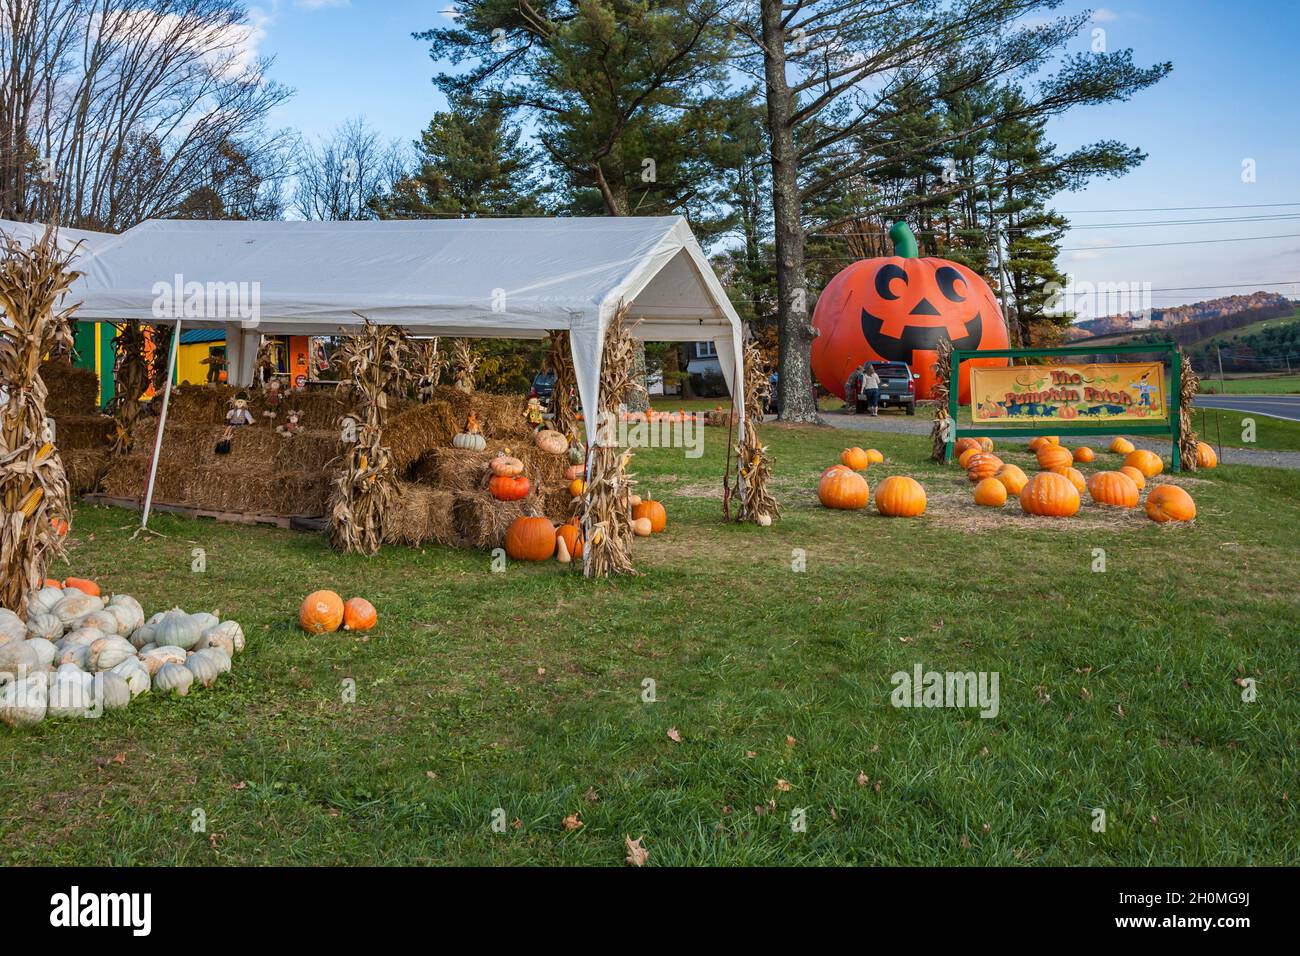 Giant inflatable Halloween pumpkin at The Pumpkin Patch roadside market in North Carolina Stock Photo